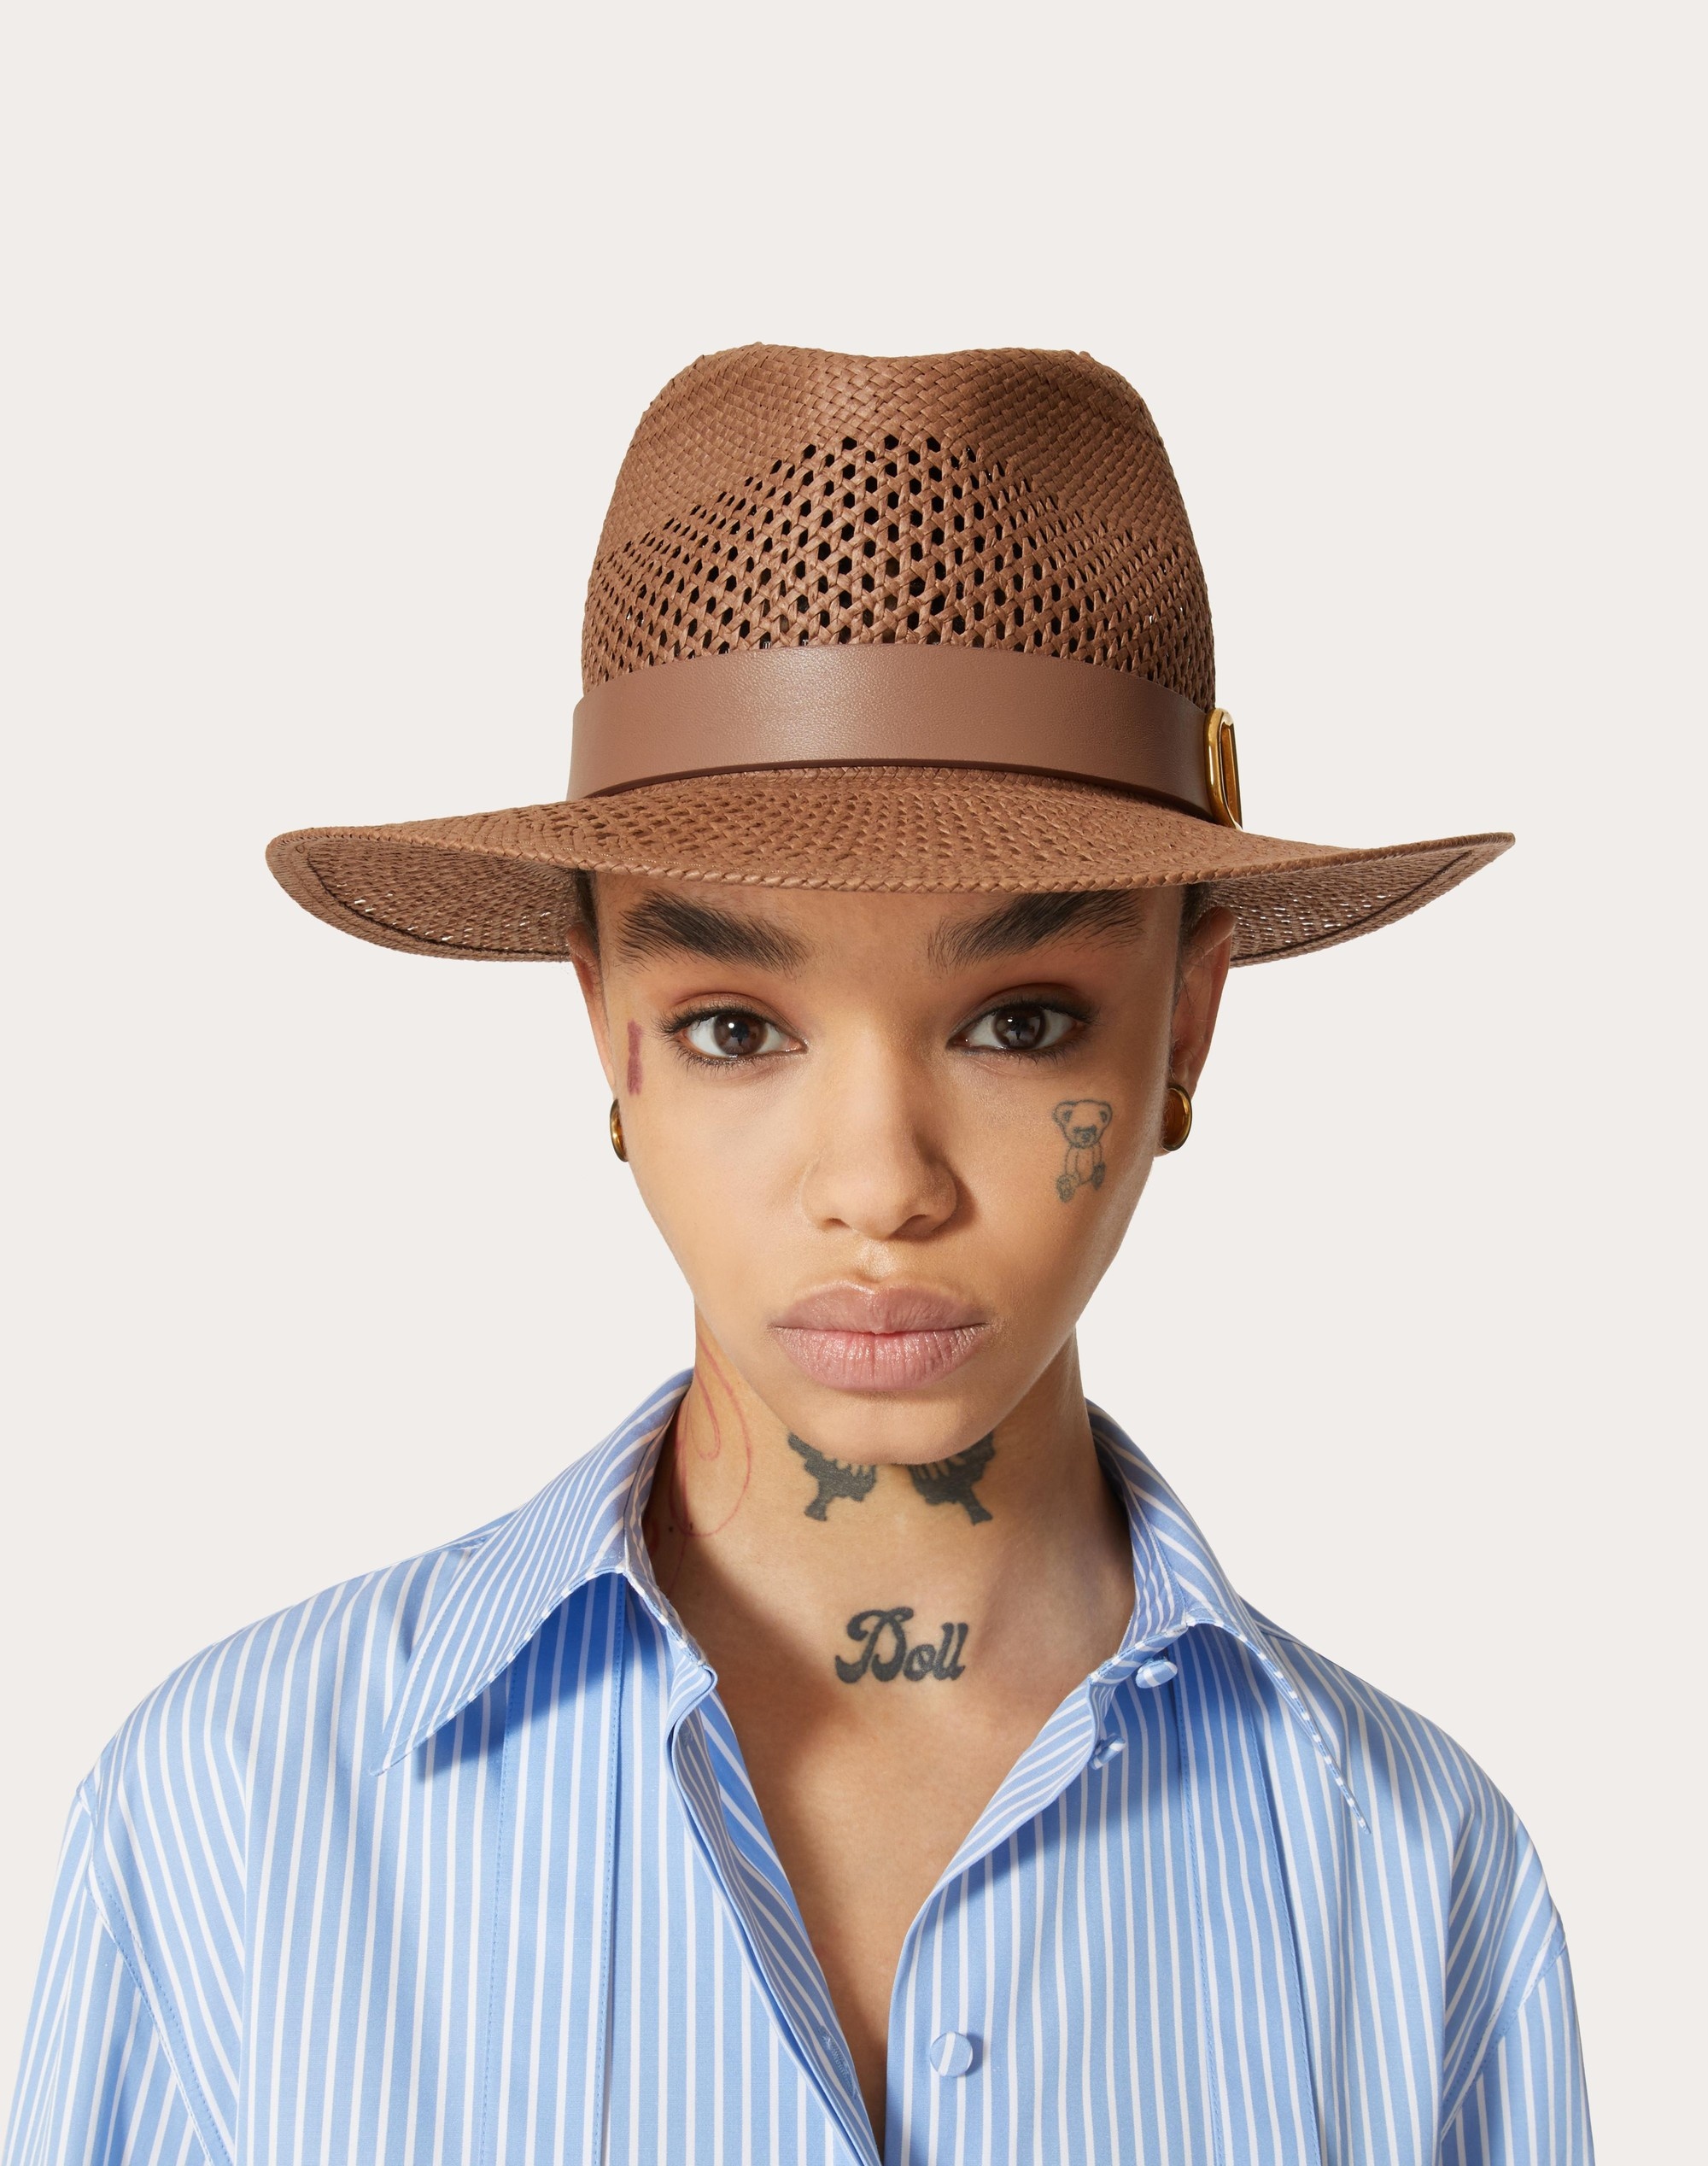 TEXTILE PAPER AND LEATHER VLOGO SIGNATURE FEDORA HAT - 4